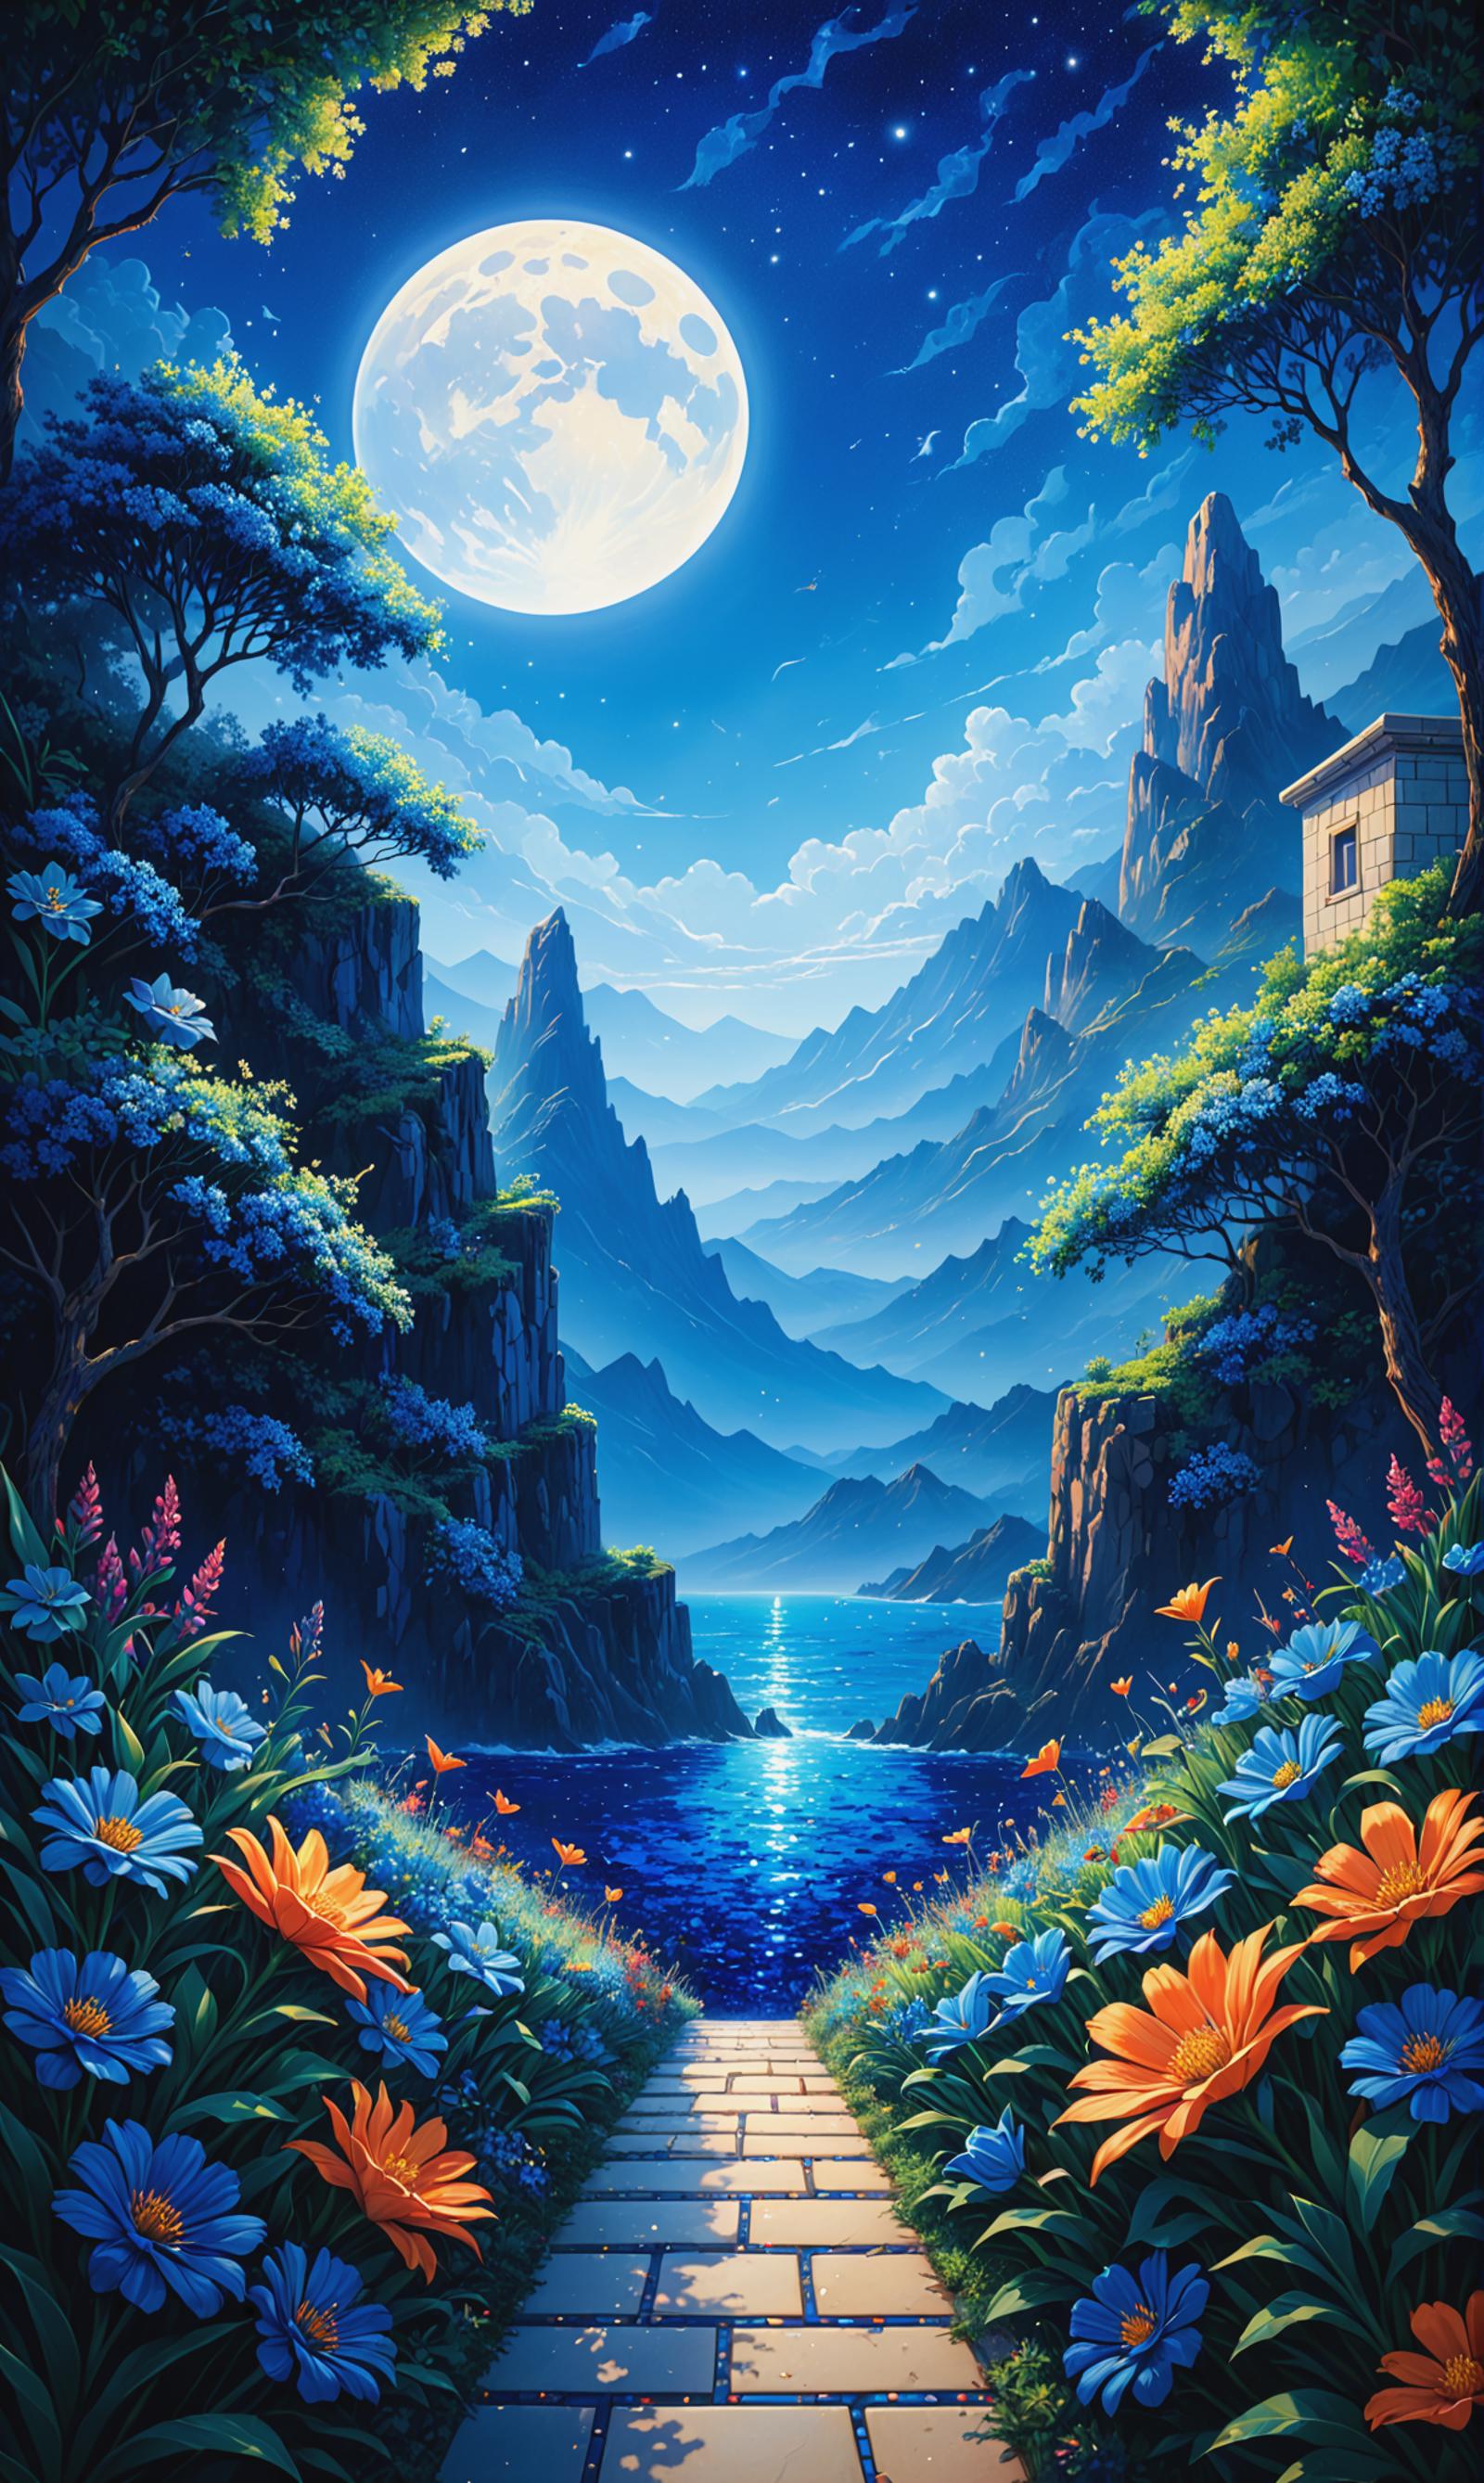 A Painting of Mountains, a Lake, and a Moonlit Sky